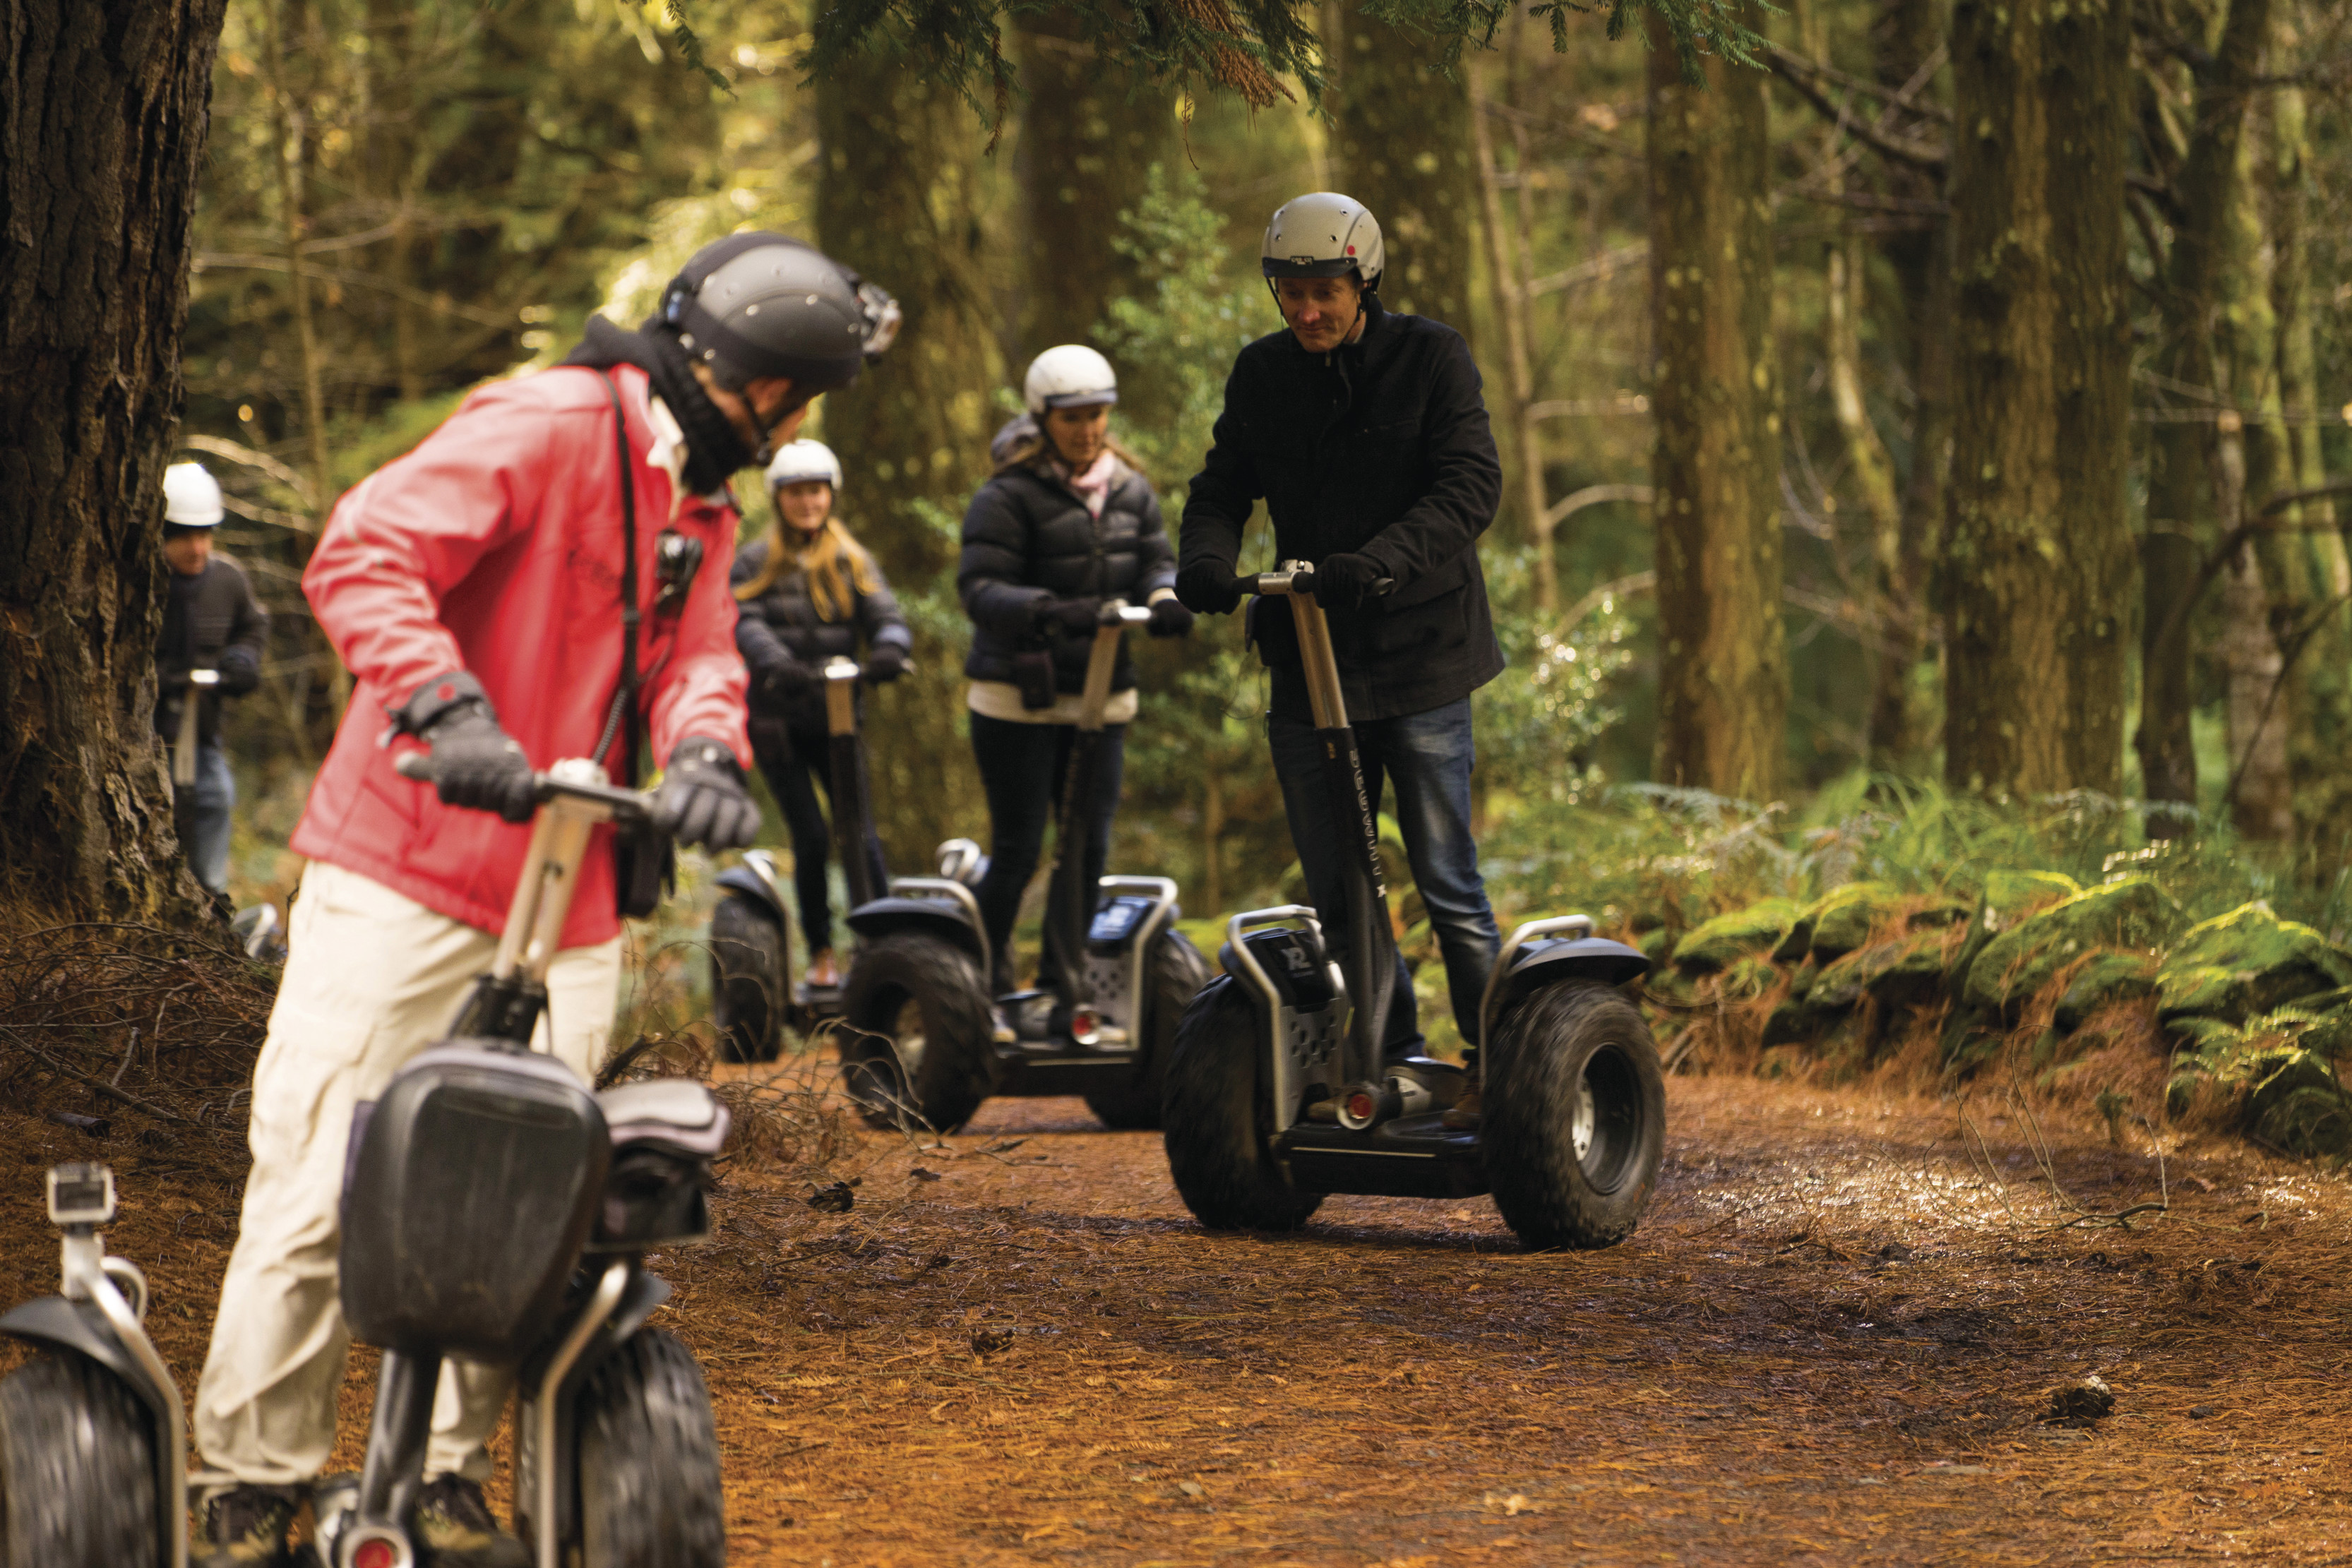 Tour guide for Hollybank Wilderness Adventures and a group of four tourists ride through the forest on off road segways.